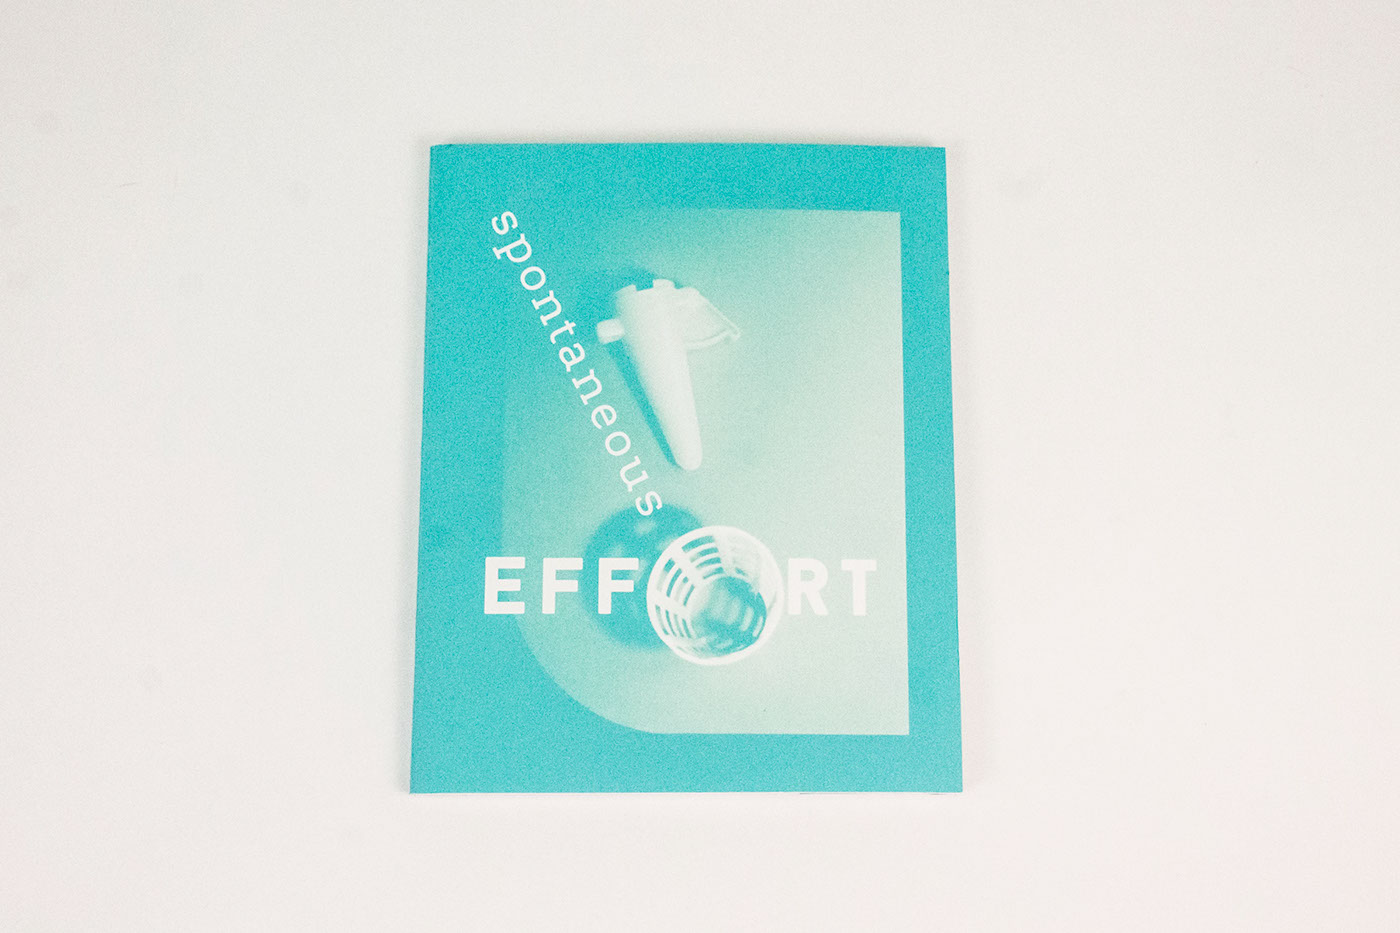 Spontaneous effort  random objects teal exercise ping-pong